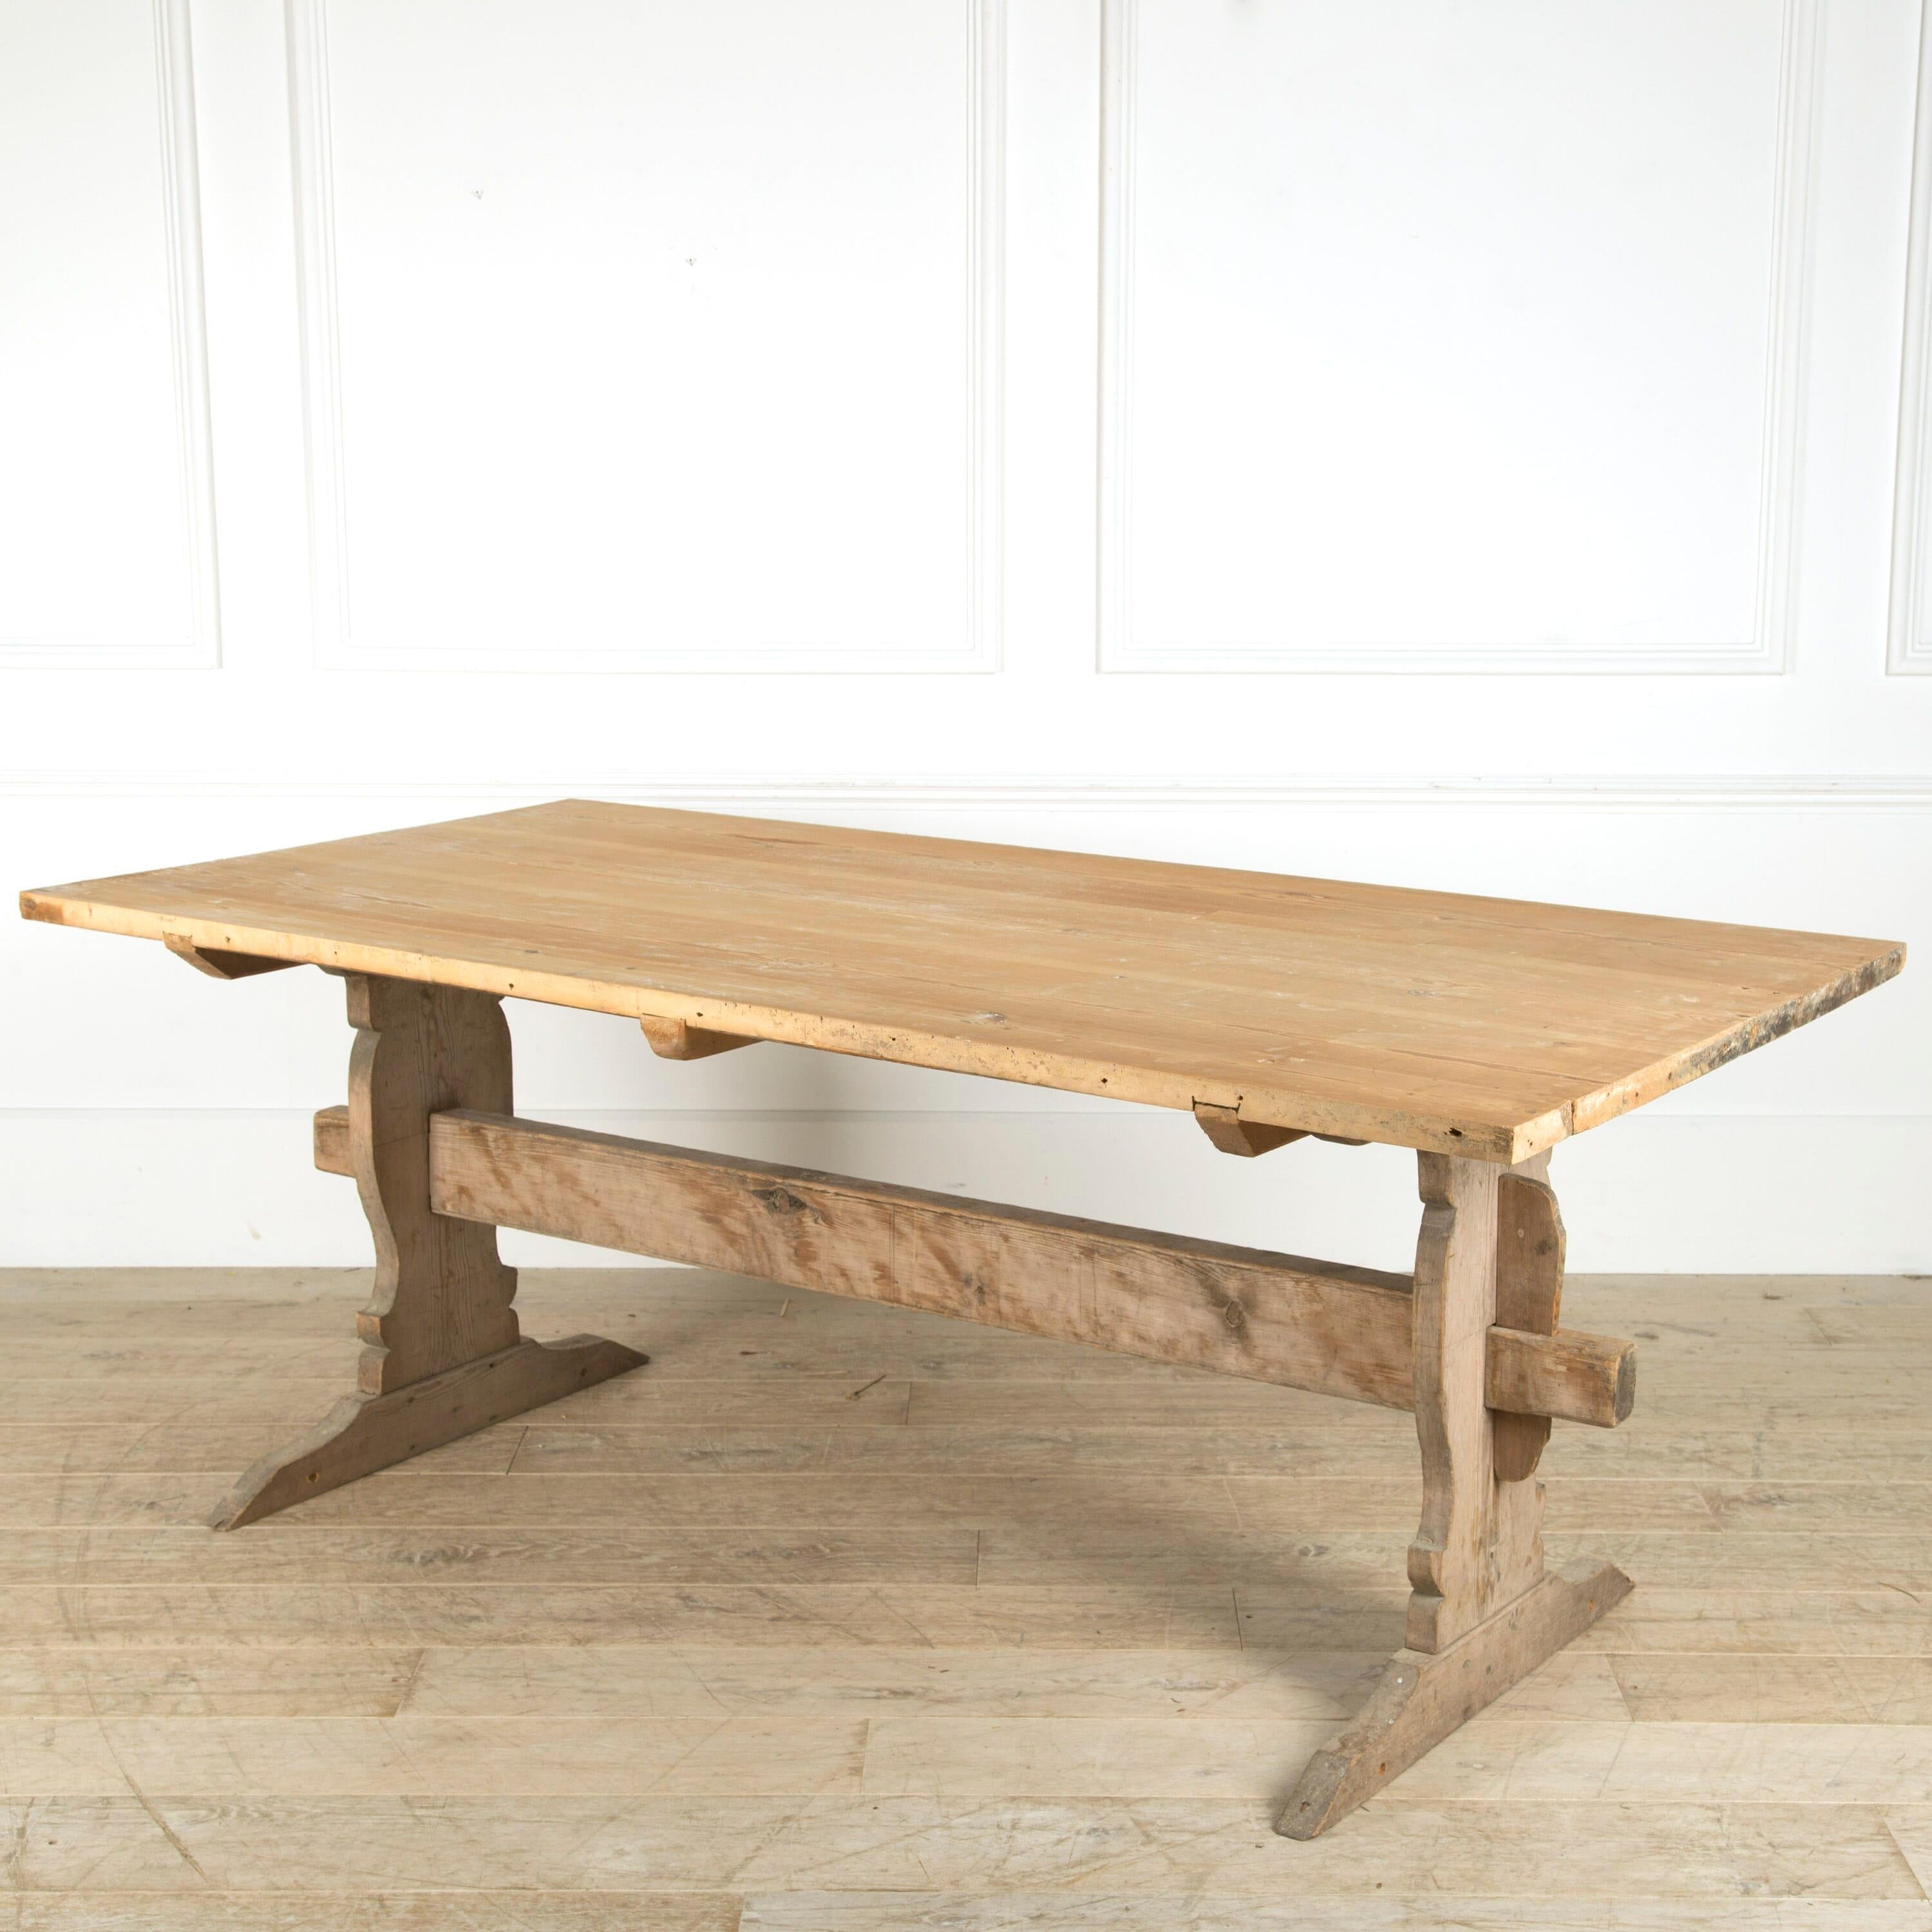 A late 18th century pine trestle table from Dalarna.